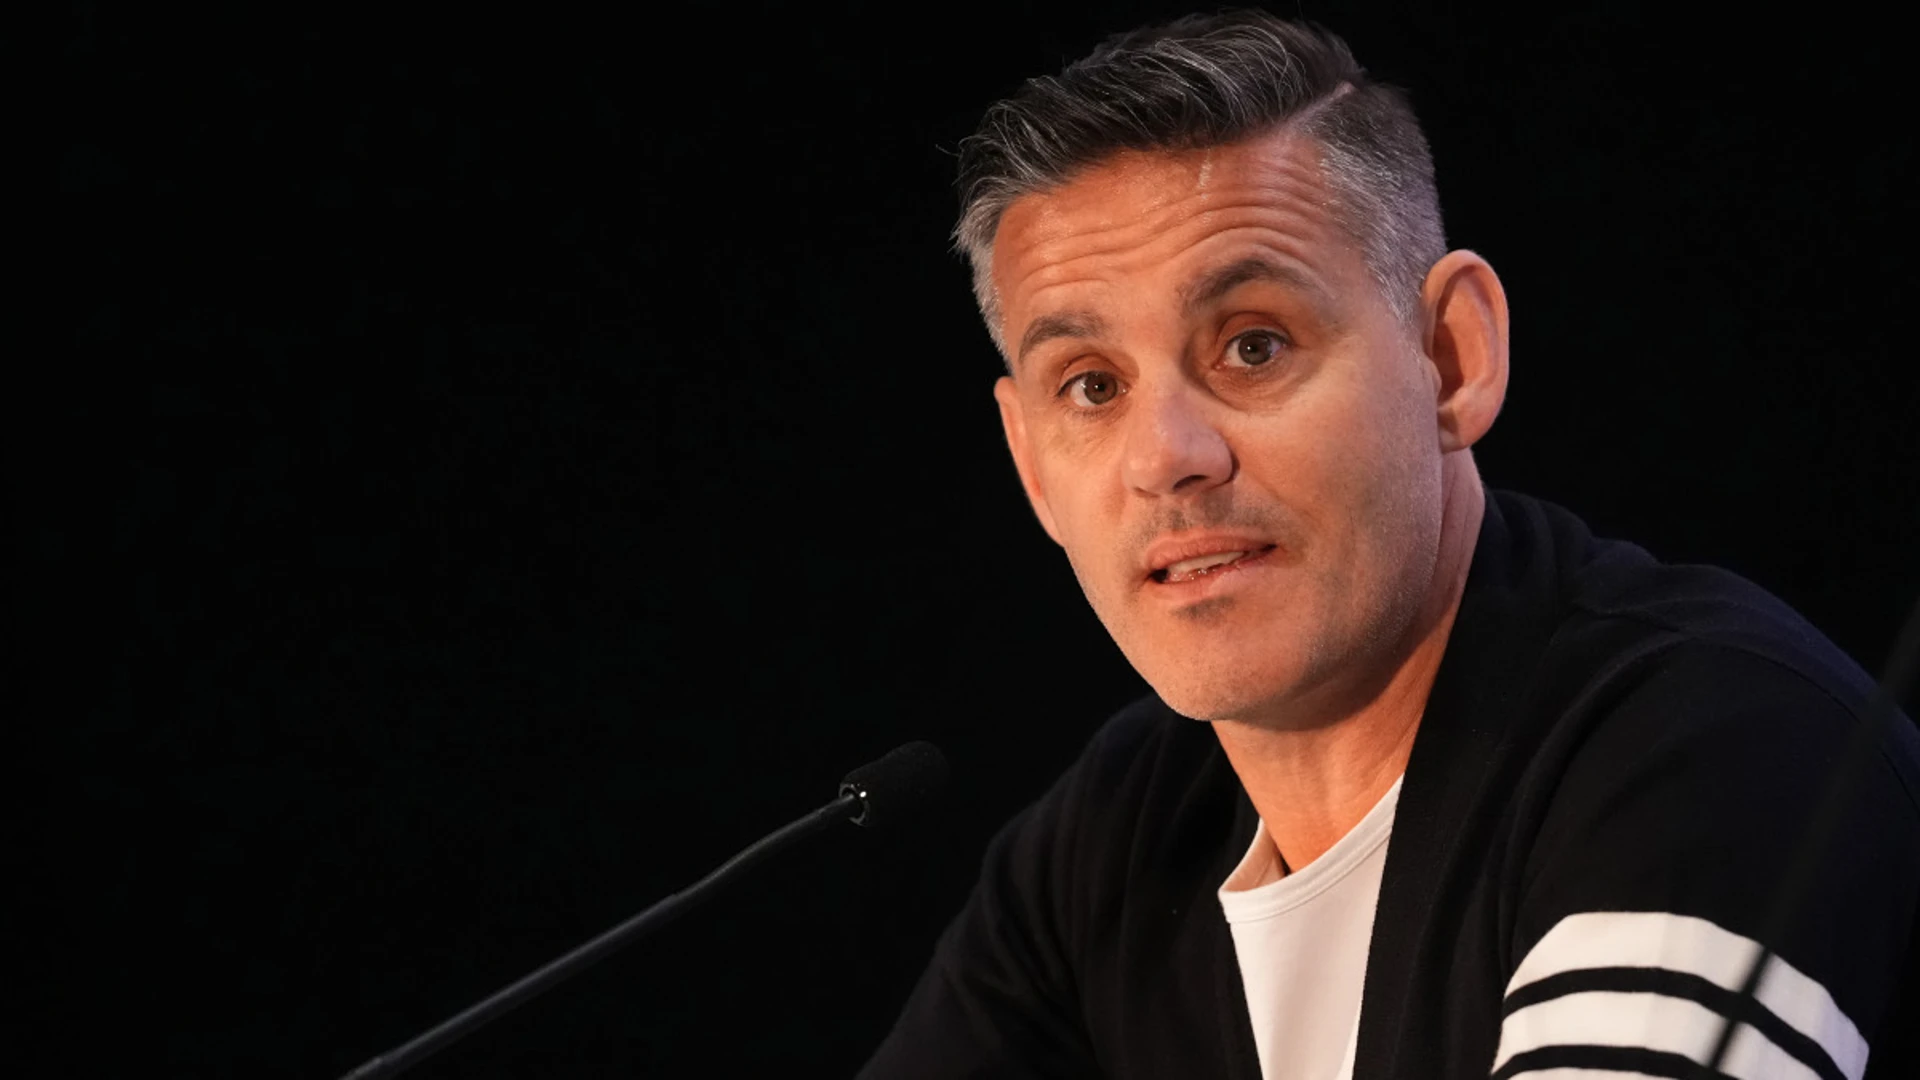 Former Canada soccer manager Herdman confident his teams did not spy with drones